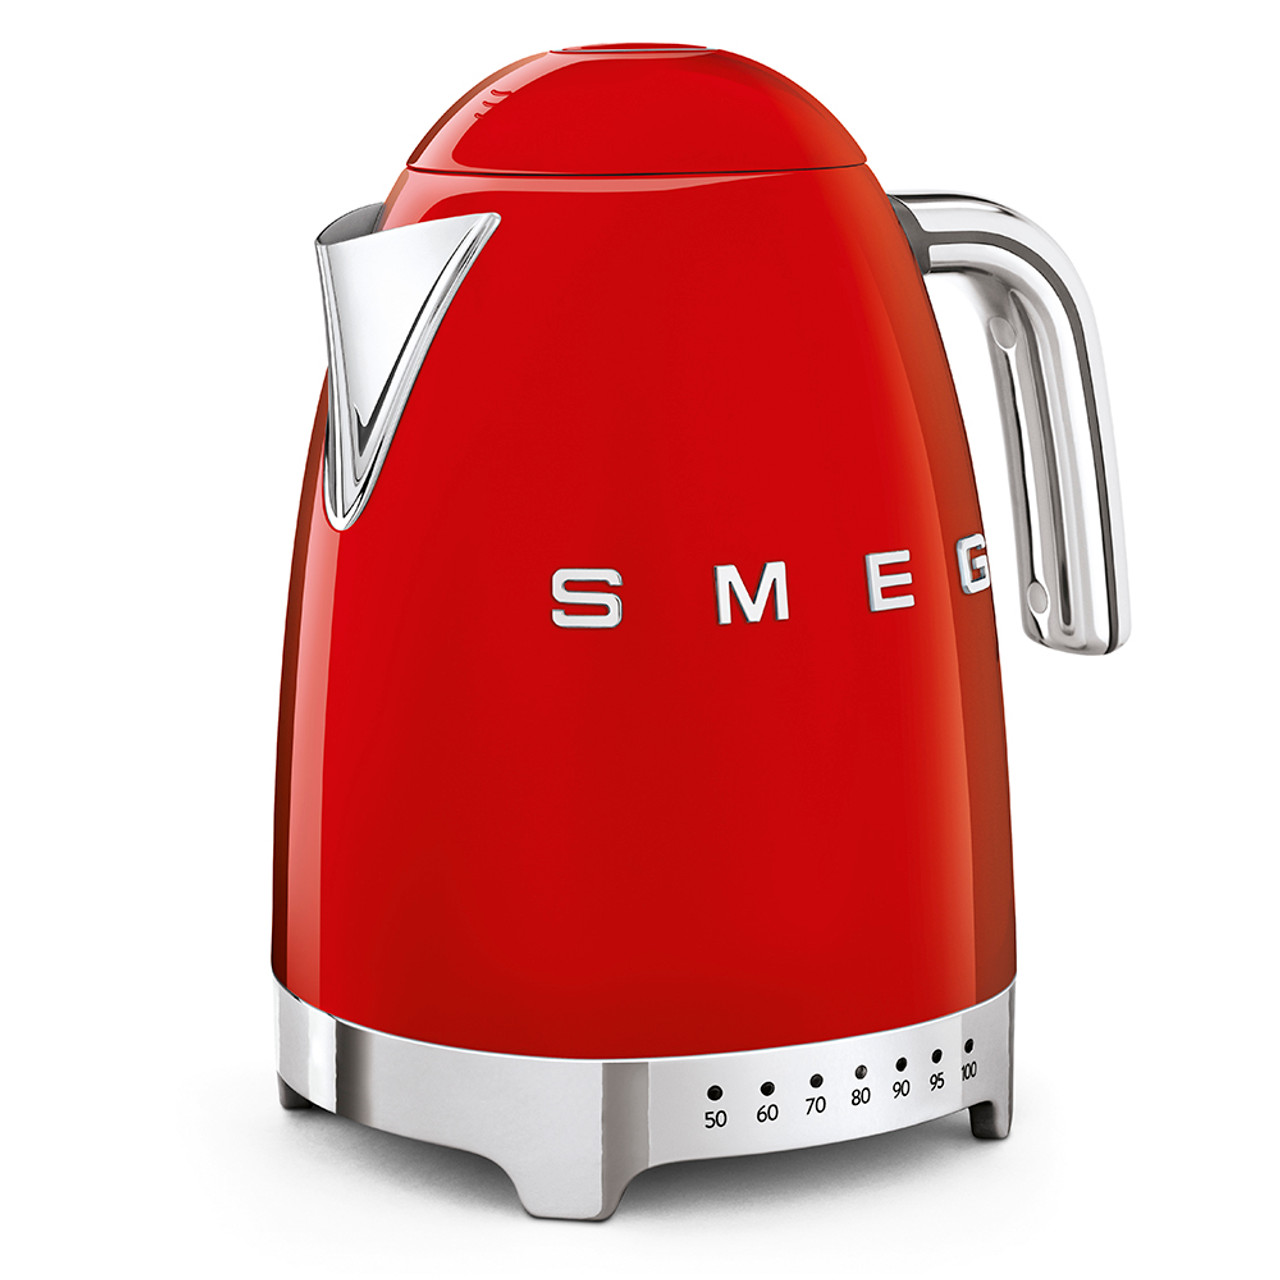 KLF04RDAU - 50'S Retro Style Aesthetic Kettle with Electric Variable Temp, RED